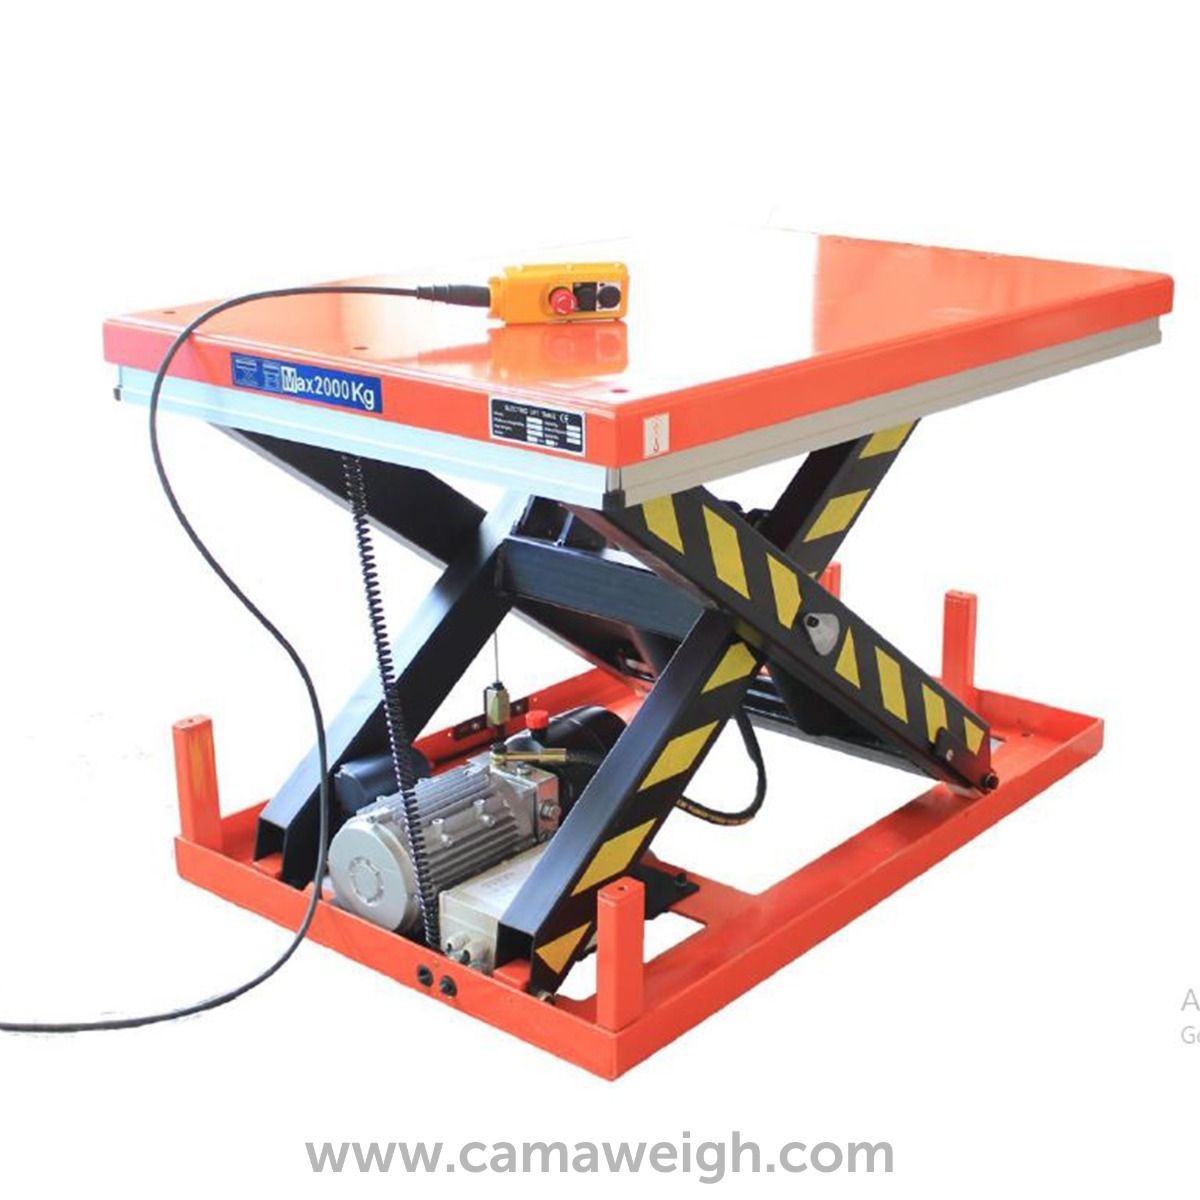 Electric Motor Powered Single Scissor Lift Table for Sale at Camaweigh